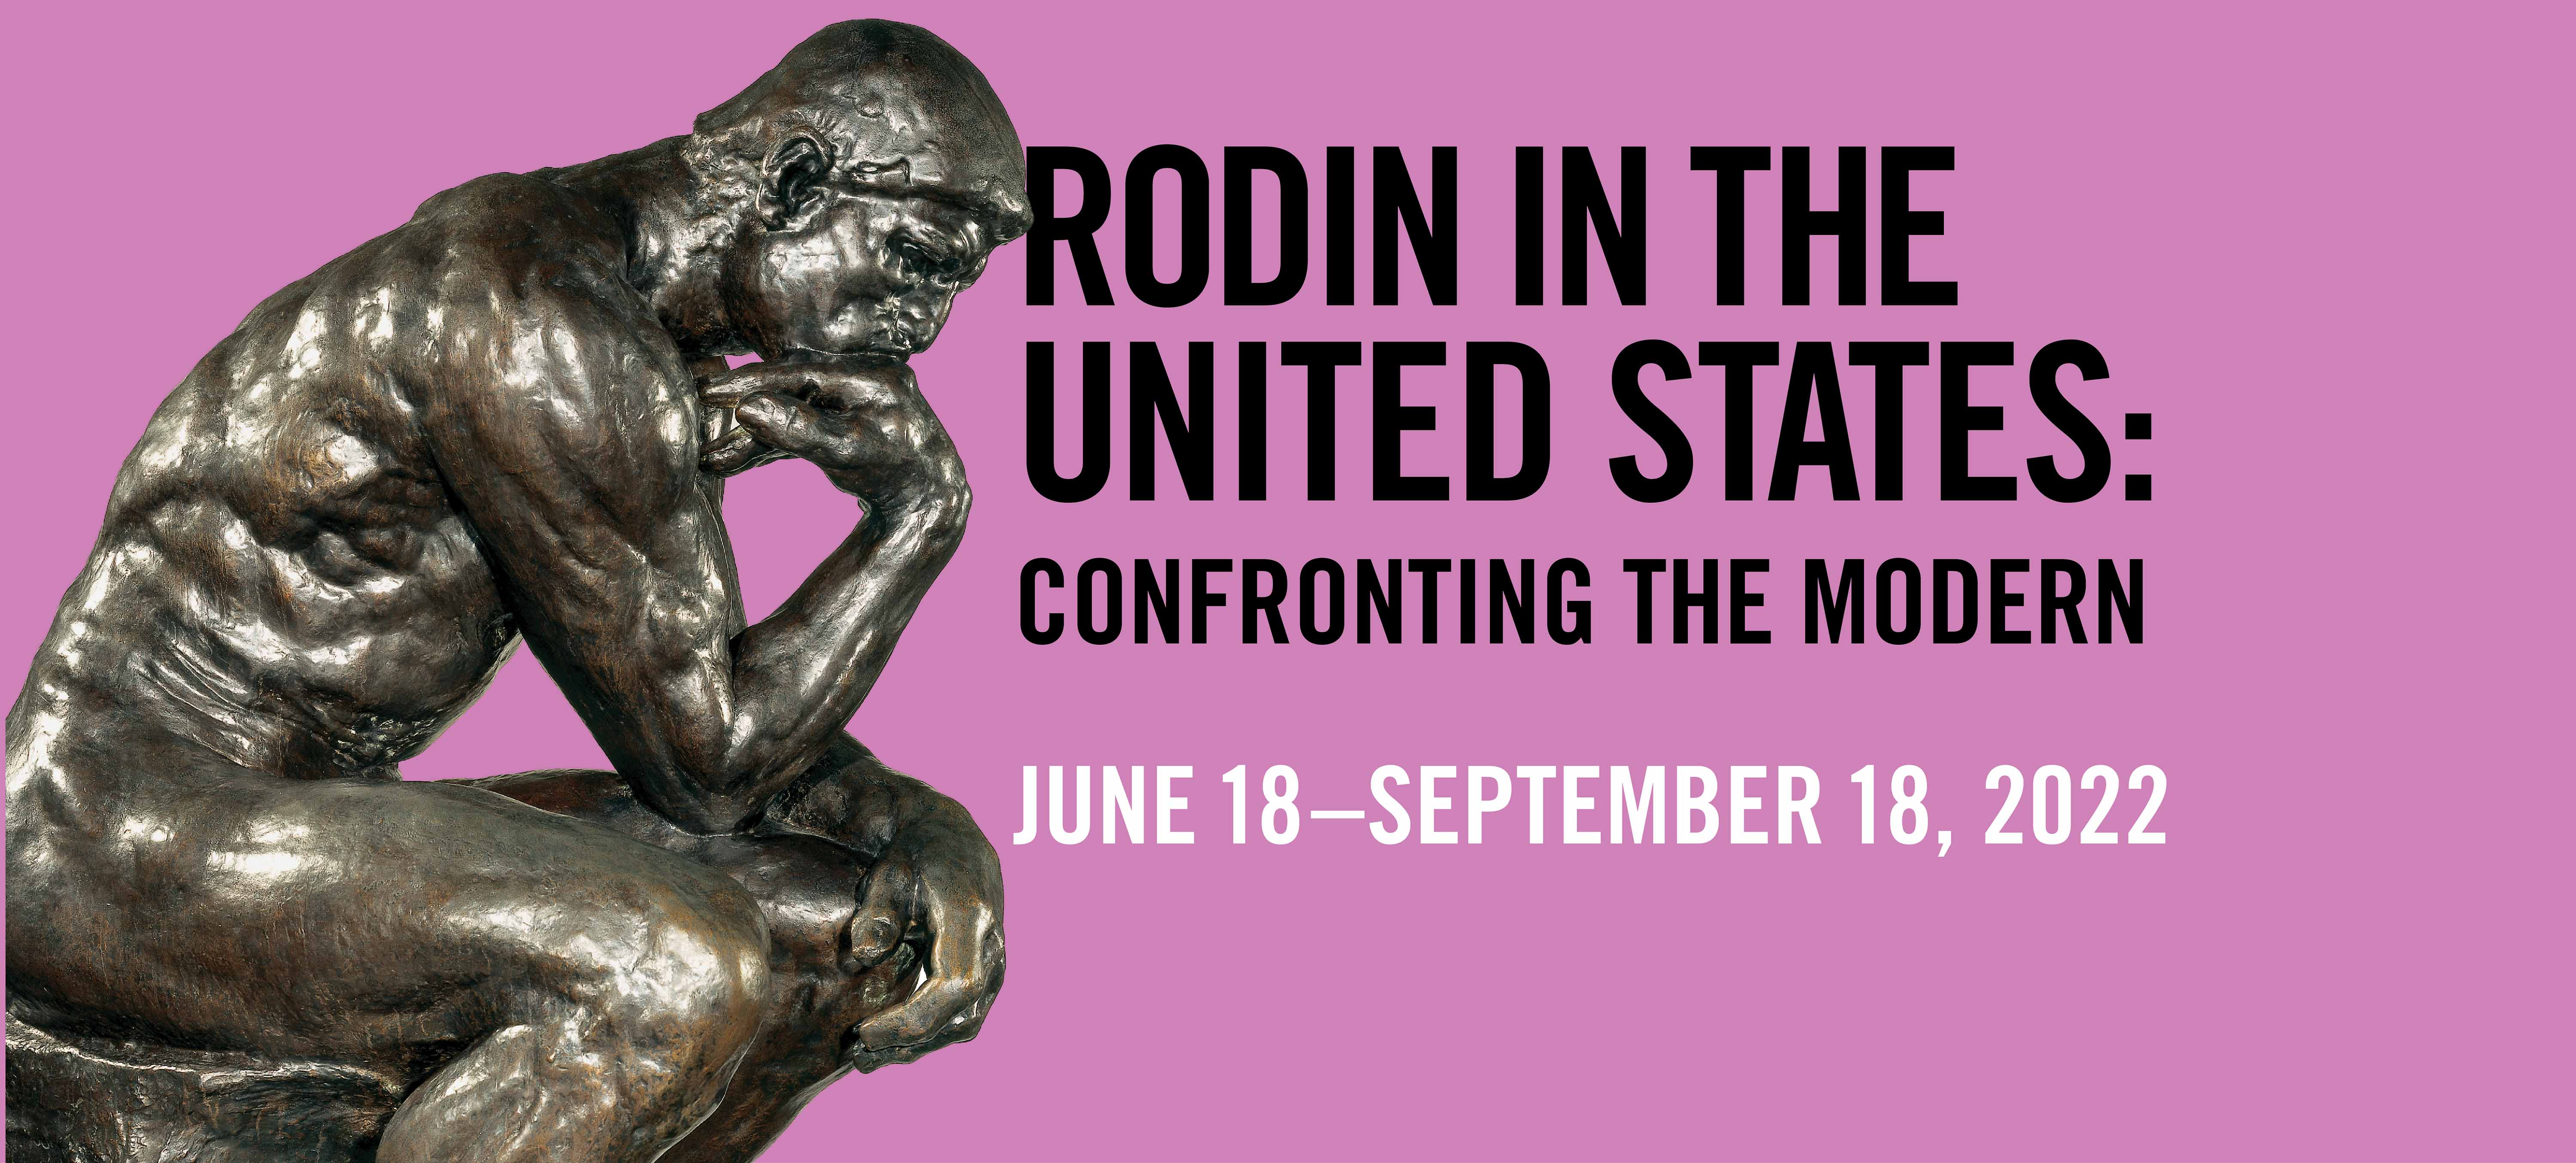 Rodin in the united states: confronting the modern.